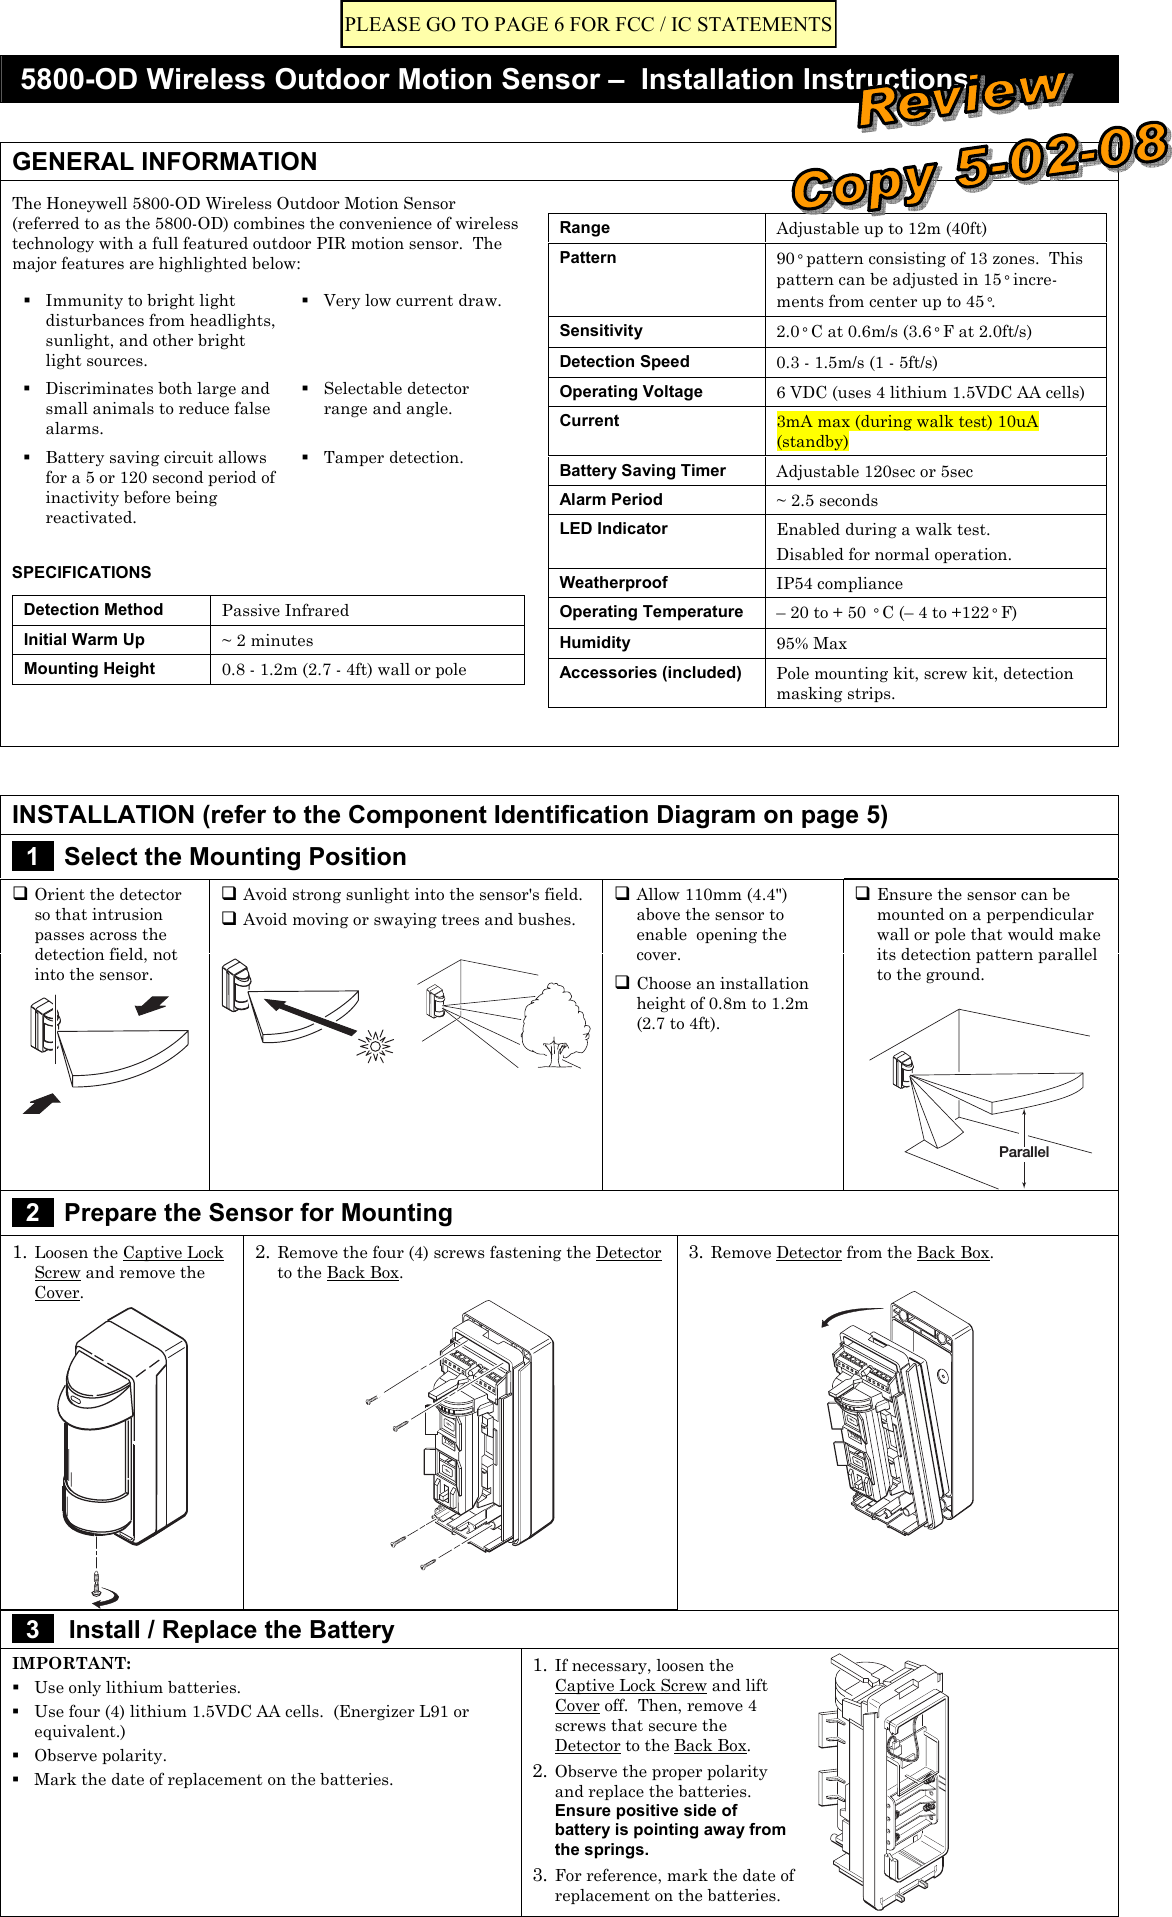  5800-OD Wireless Outdoor Motion Sensor –  Installation Instructions   GENERAL INFORMATION The Honeywell 5800-OD Wireless Outdoor Motion Sensor (referred to as the 5800-OD) combines the convenience of wireless technology with a full featured outdoor PIR motion sensor.  The major features are highlighted below:  Immunity to bright light disturbances from headlights, sunlight, and other bright light sources.  Very low current draw.  Discriminates both large and small animals to reduce false alarms.  Selectable detector range and angle.  Battery saving circuit allows for a 5 or 120 second period of inactivity before being reactivated.  Tamper detection.  SPECIFICATIONS Detection Method  Passive Infrared Initial Warm Up  ~ 2 minutes Mounting Height  0.8 - 1.2m (2.7 - 4ft) wall or pole   Range  Adjustable up to 12m (40ft) Pattern  90° pattern consisting of 13 zones.  This pattern can be adjusted in 15° incre-ments from center up to 45°.   Sensitivity  2.0° C at 0.6m/s (3.6° F at 2.0ft/s) Detection Speed  0.3 - 1.5m/s (1 - 5ft/s) Operating Voltage  6 VDC (uses 4 lithium 1.5VDC AA cells) Current  3mA max (during walk test) 10uA (standby) Battery Saving Timer  Adjustable 120sec or 5sec Alarm Period  ~ 2.5 seconds LED Indicator  Enabled during a walk test. Disabled for normal operation. Weatherproof  IP54 compliance Operating Temperature  – 20 to + 50 ° C (– 4 to +122° F) Humidity  95% Max Accessories (included)  Pole mounting kit, screw kit, detection masking strips.      INSTALLATION (refer to the Component Identification Diagram on page 5)  1   Select the Mounting Position  Avoid strong sunlight into the sensor&apos;s field.  Avoid moving or swaying trees and bushes.  Orient the detector so that intrusion passes across the detection field, not into the sensor.      Allow 110mm (4.4&quot;) above the sensor to enable  opening the cover.   Choose an installation height of 0.8m to 1.2m (2.7 to 4ft).    Ensure the sensor can be mounted on a perpendicular wall or pole that would make its detection pattern parallel to the ground.  Parallel  2   Prepare the Sensor for Mounting 1. Loosen the Captive Lock Screw and remove the Cover.  2. Remove the four (4) screws fastening the Detector to the Back Box.   3. Remove Detector from the Back Box.    3   Install / Replace the Battery IMPORTANT:  Use only lithium batteries.  Use four (4) lithium 1.5VDC AA cells.  (Energizer L91 or equivalent.)  Observe polarity.  Mark the date of replacement on the batteries. 1. If necessary, loosen the Captive Lock Screw and lift Cover off.  Then, remove 4 screws that secure the Detector to the Back Box. 2. Observe the proper polarity and replace the batteries.  Ensure positive side of battery is pointing away from the springs. 3. For reference, mark the date of replacement on the batteries.     PLEASE GO TO PAGE 6 FOR FCC / IC STATEMENTS